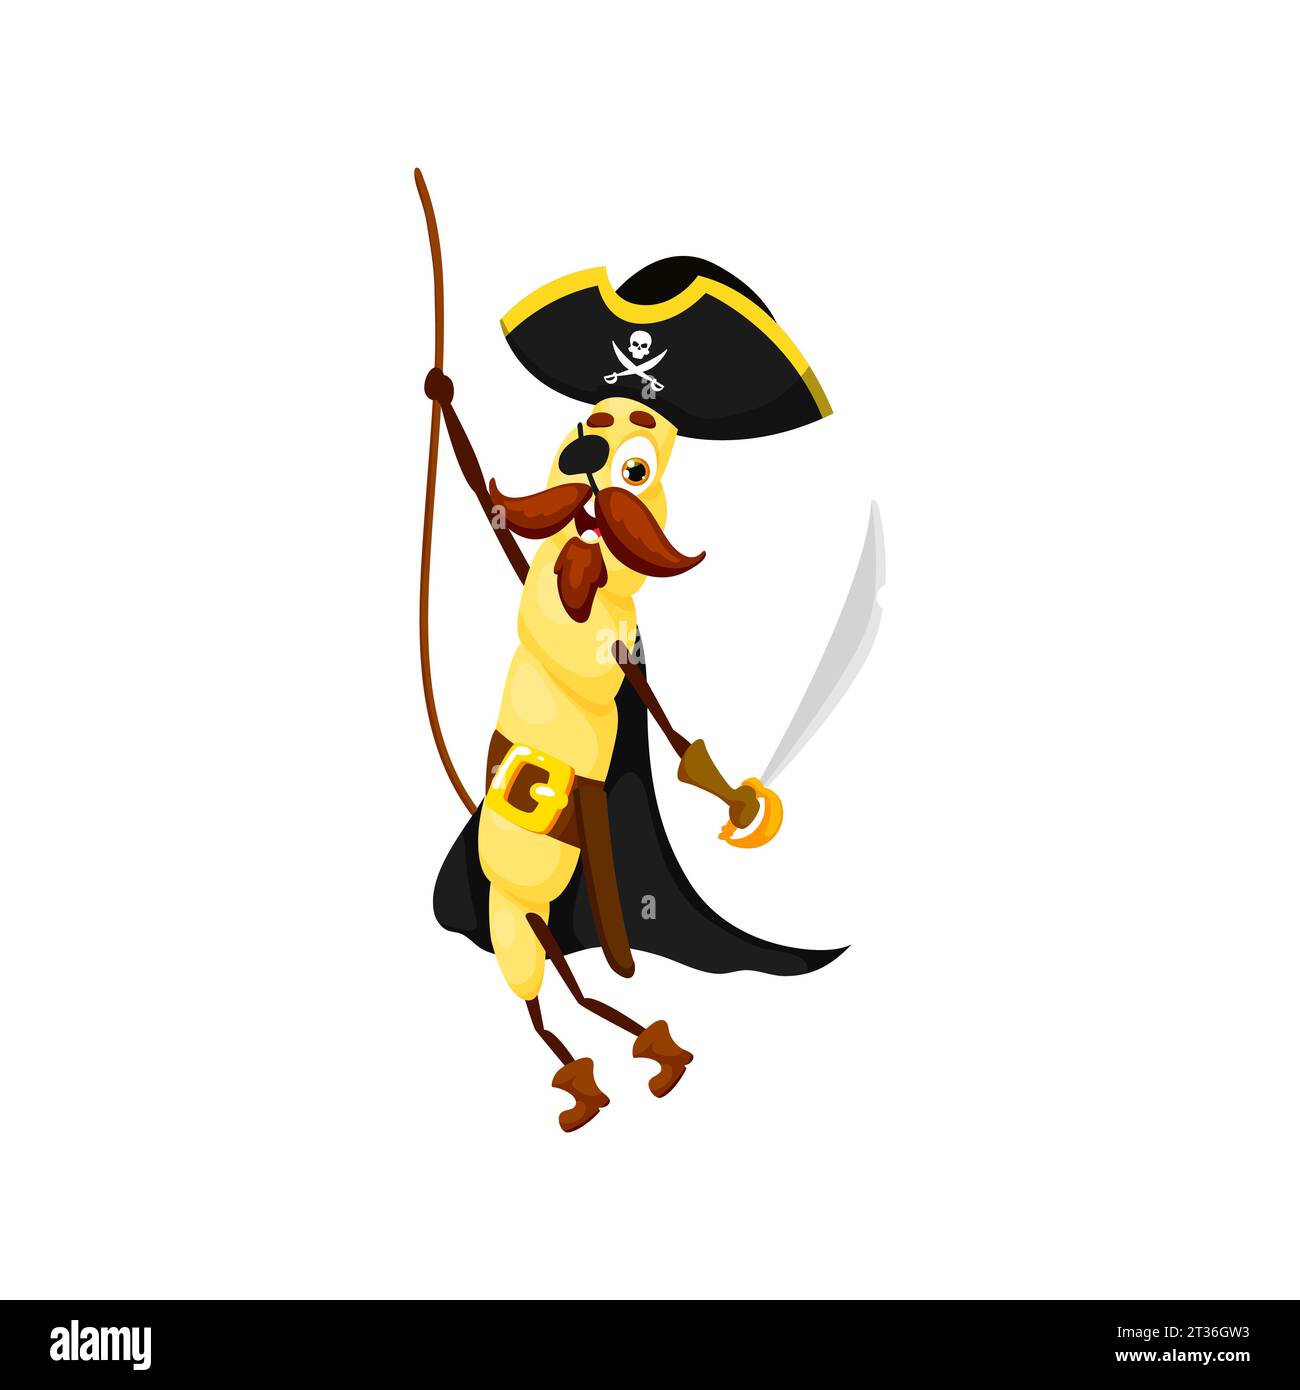 https://c8.alamy.com/comp/2T36GW3/cartoon-funny-gemelli-italian-pasta-pirate-and-corsair-character-balancing-on-a-rope-wielding-a-saber-isolated-vector-daring-captain-noodle-rover-ready-for-swashbuckling-adventures-on-the-high-seas-2T36GW3.jpg